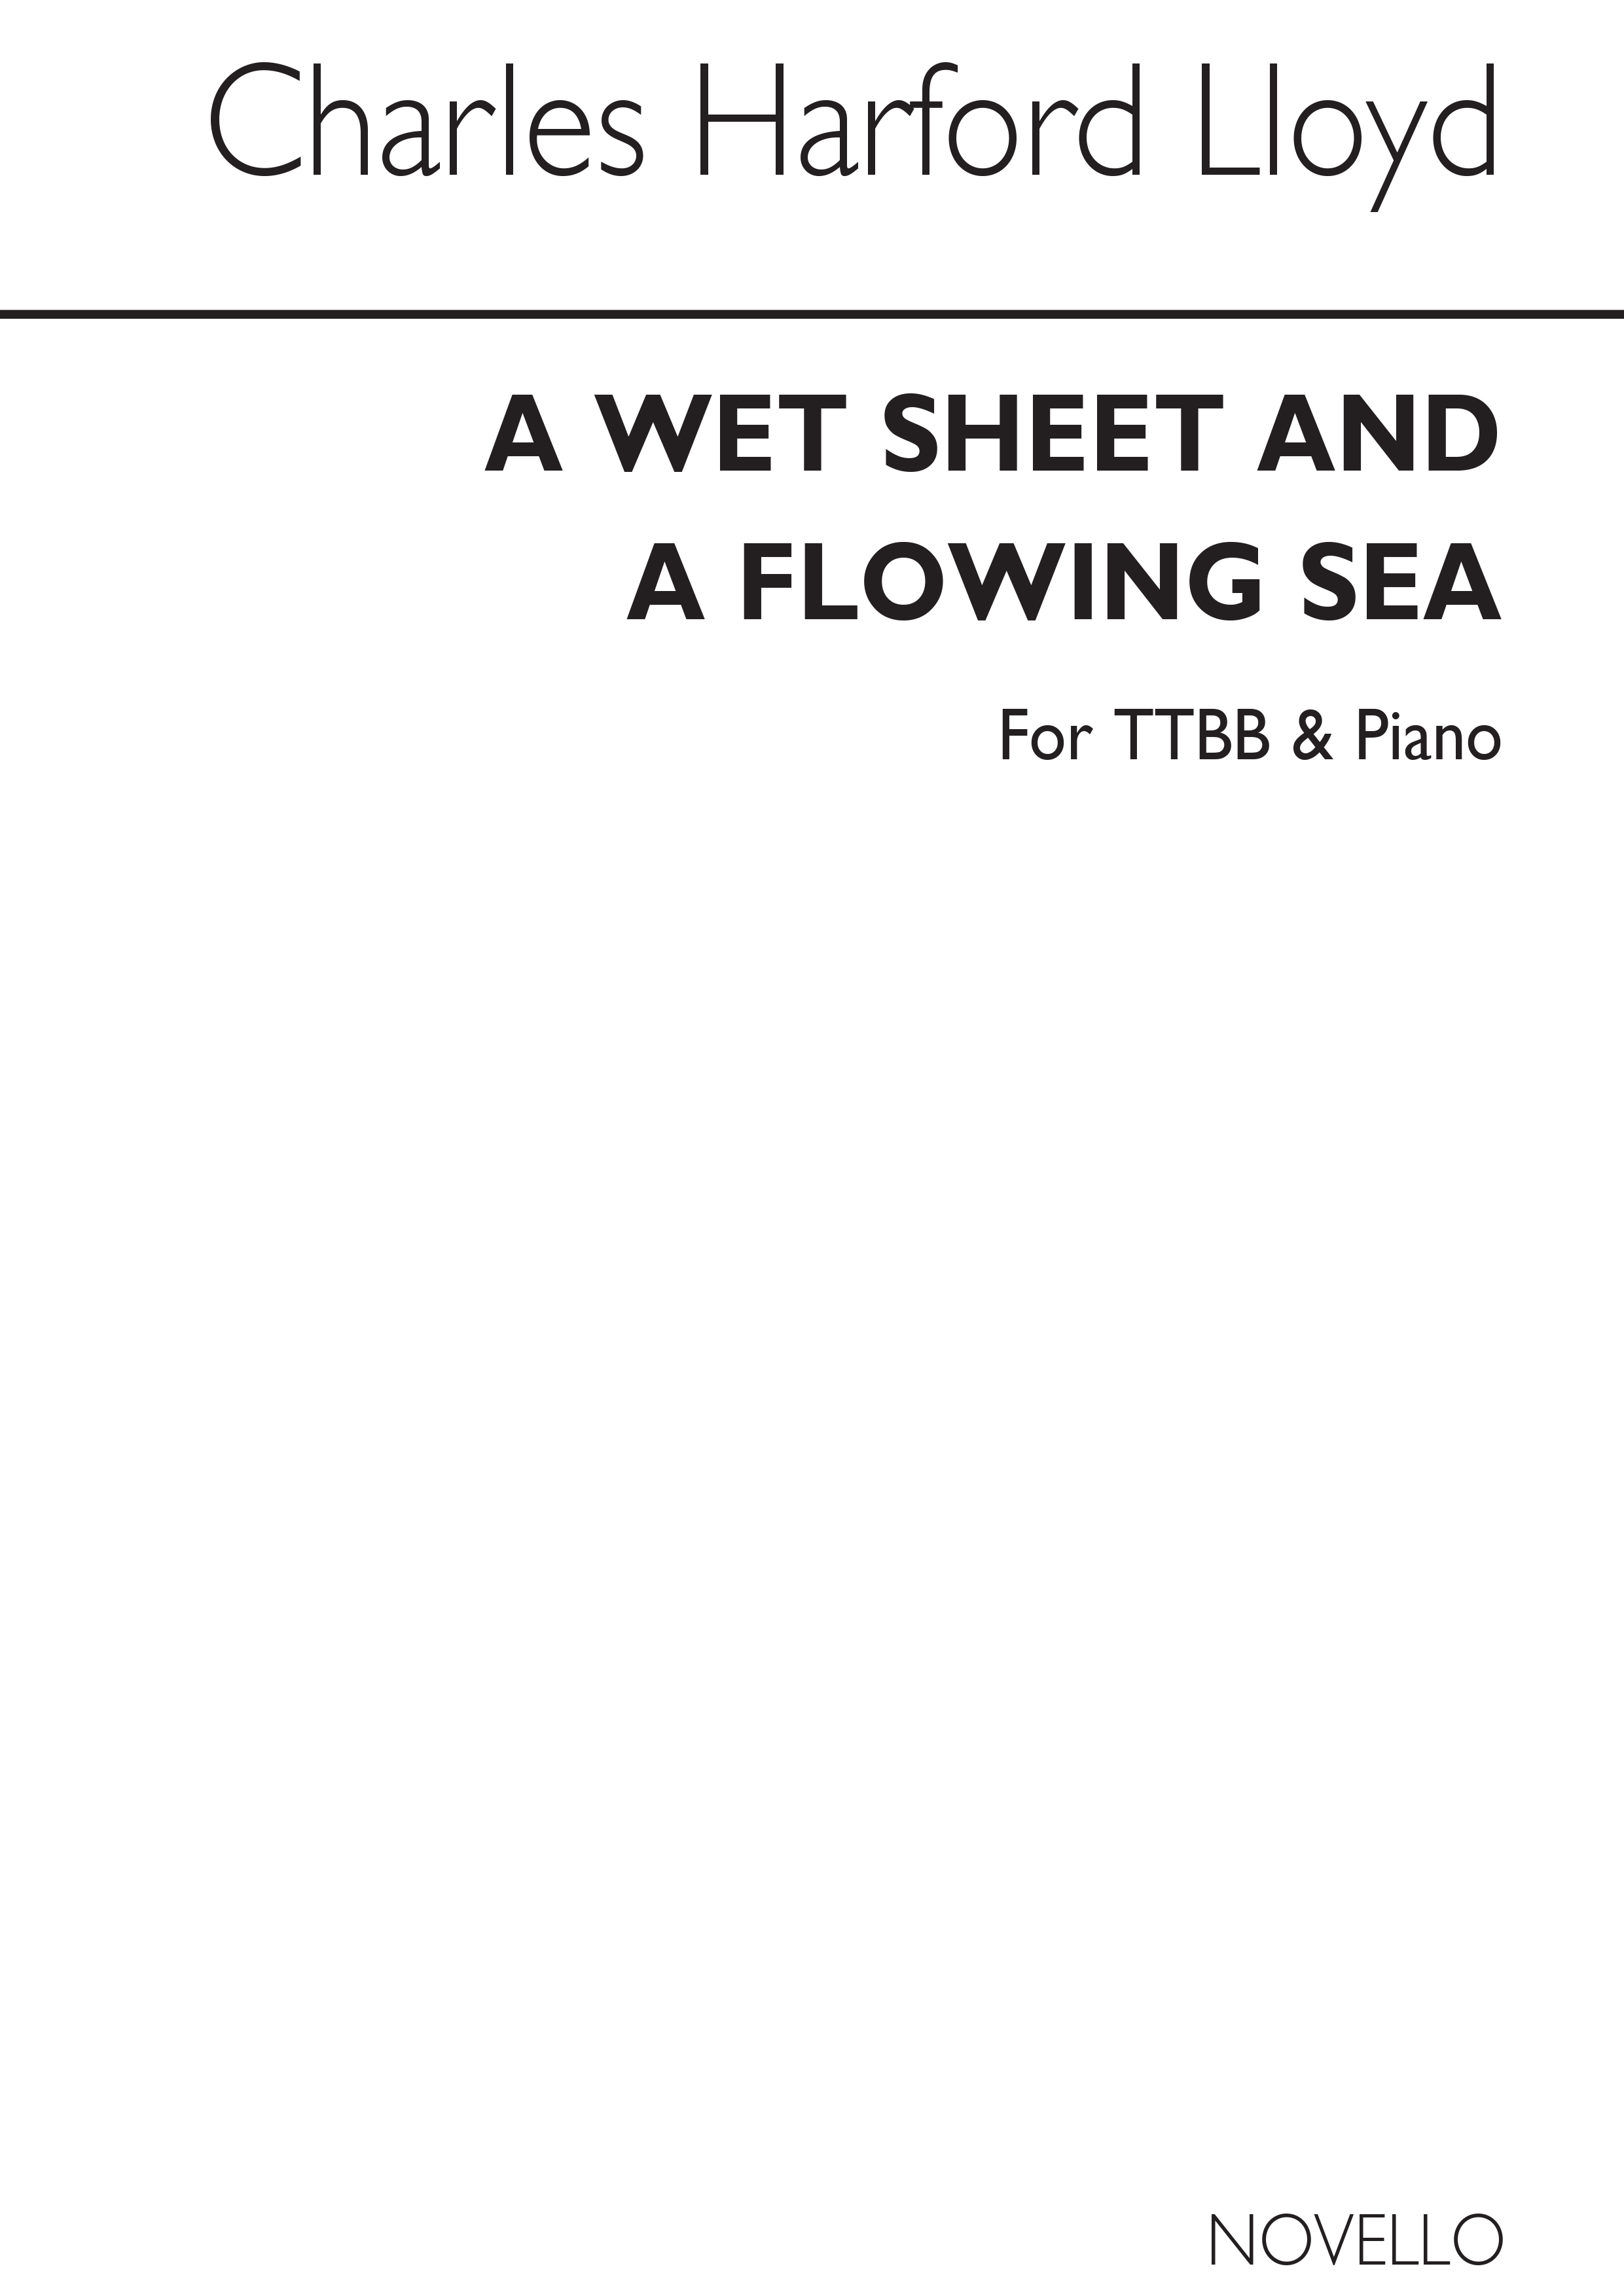 Lloyd, C.H. A Wet Sheet And A Flowing Sea Ttbb And Piano